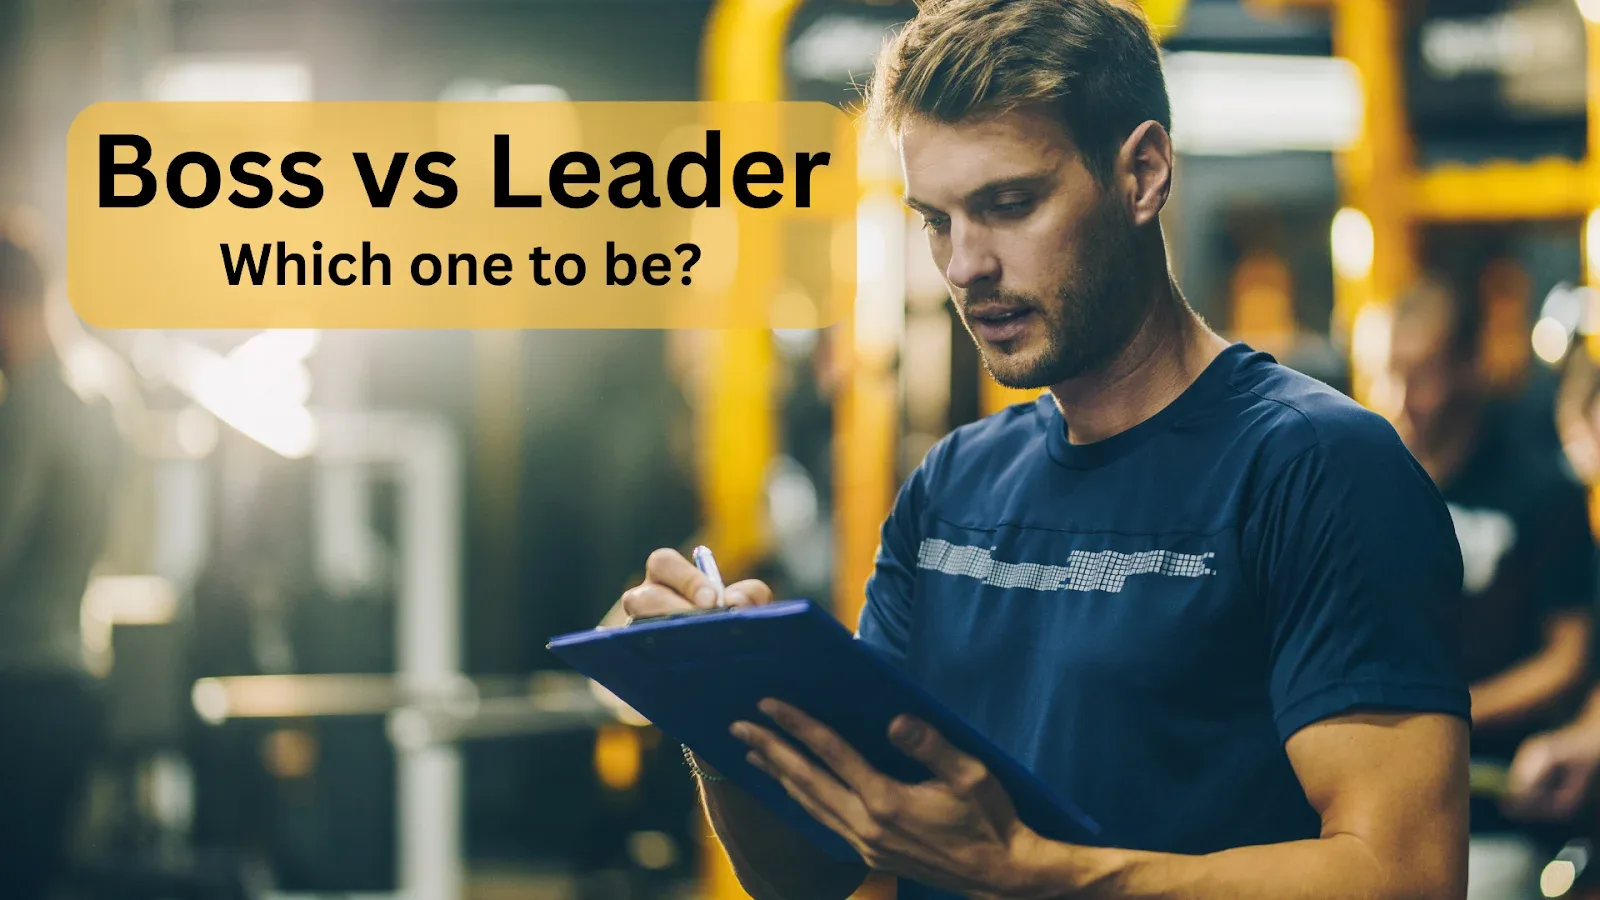 Boss vs Leader: Which one to be and how? - Dr. Eddie O'Connor